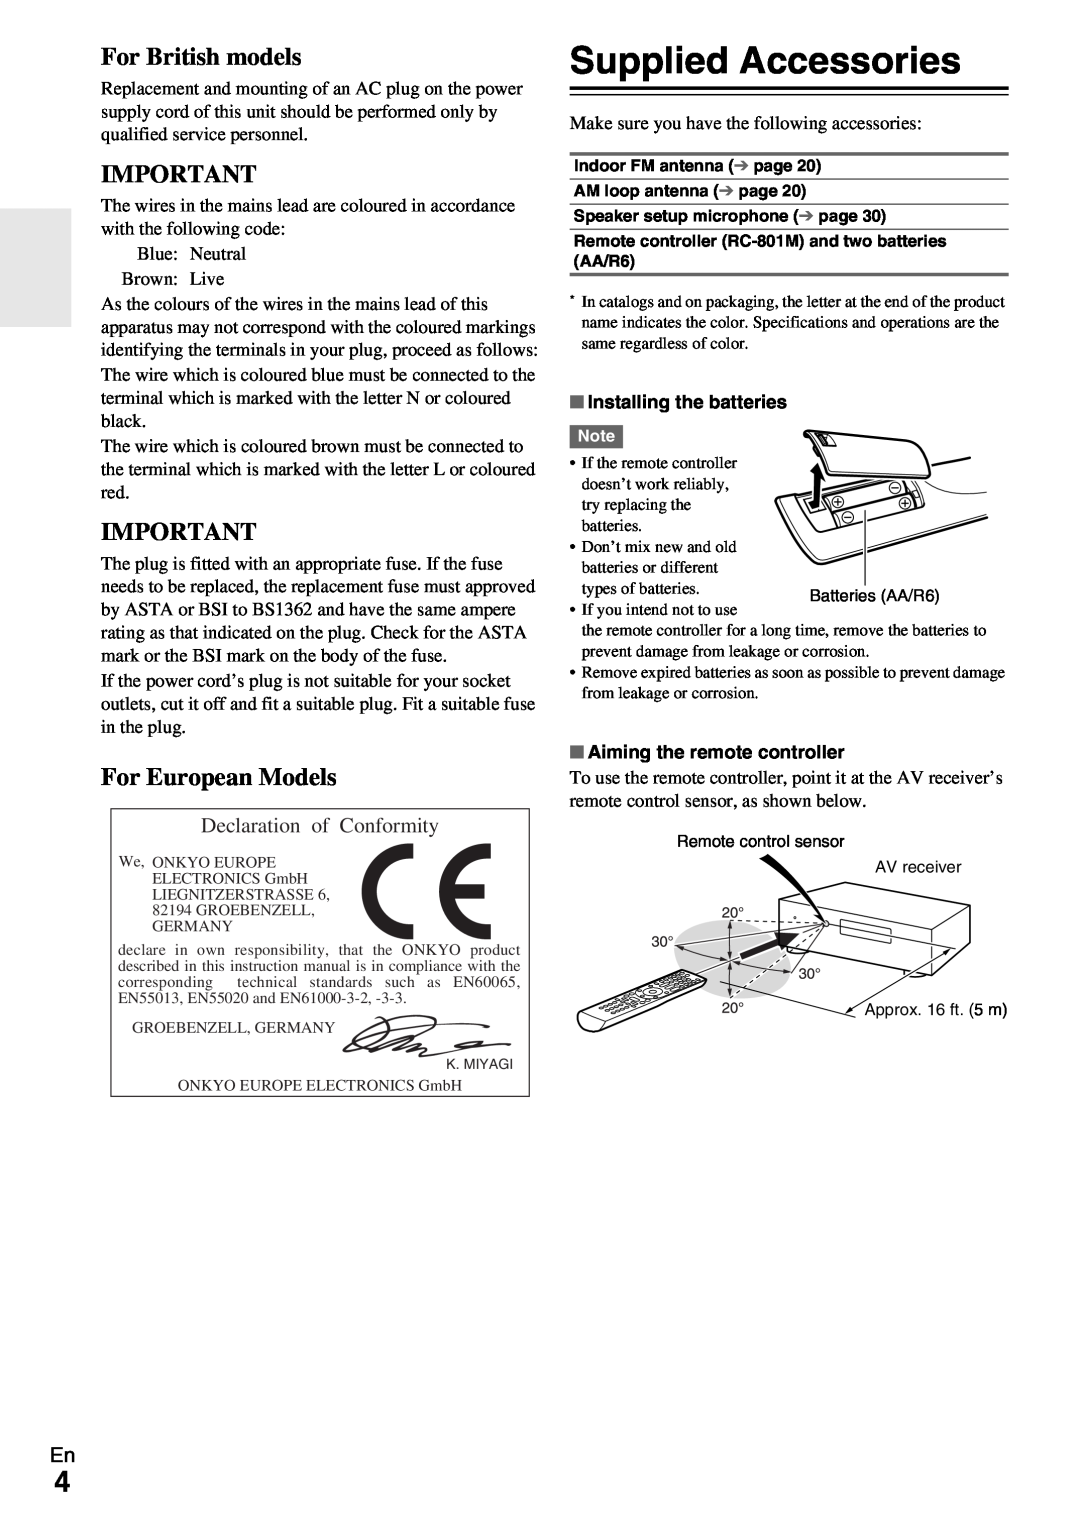 Onkyo HT-R990 instruction manual Supplied Accessories, For British models, For European Models, Declaration of Conformity 